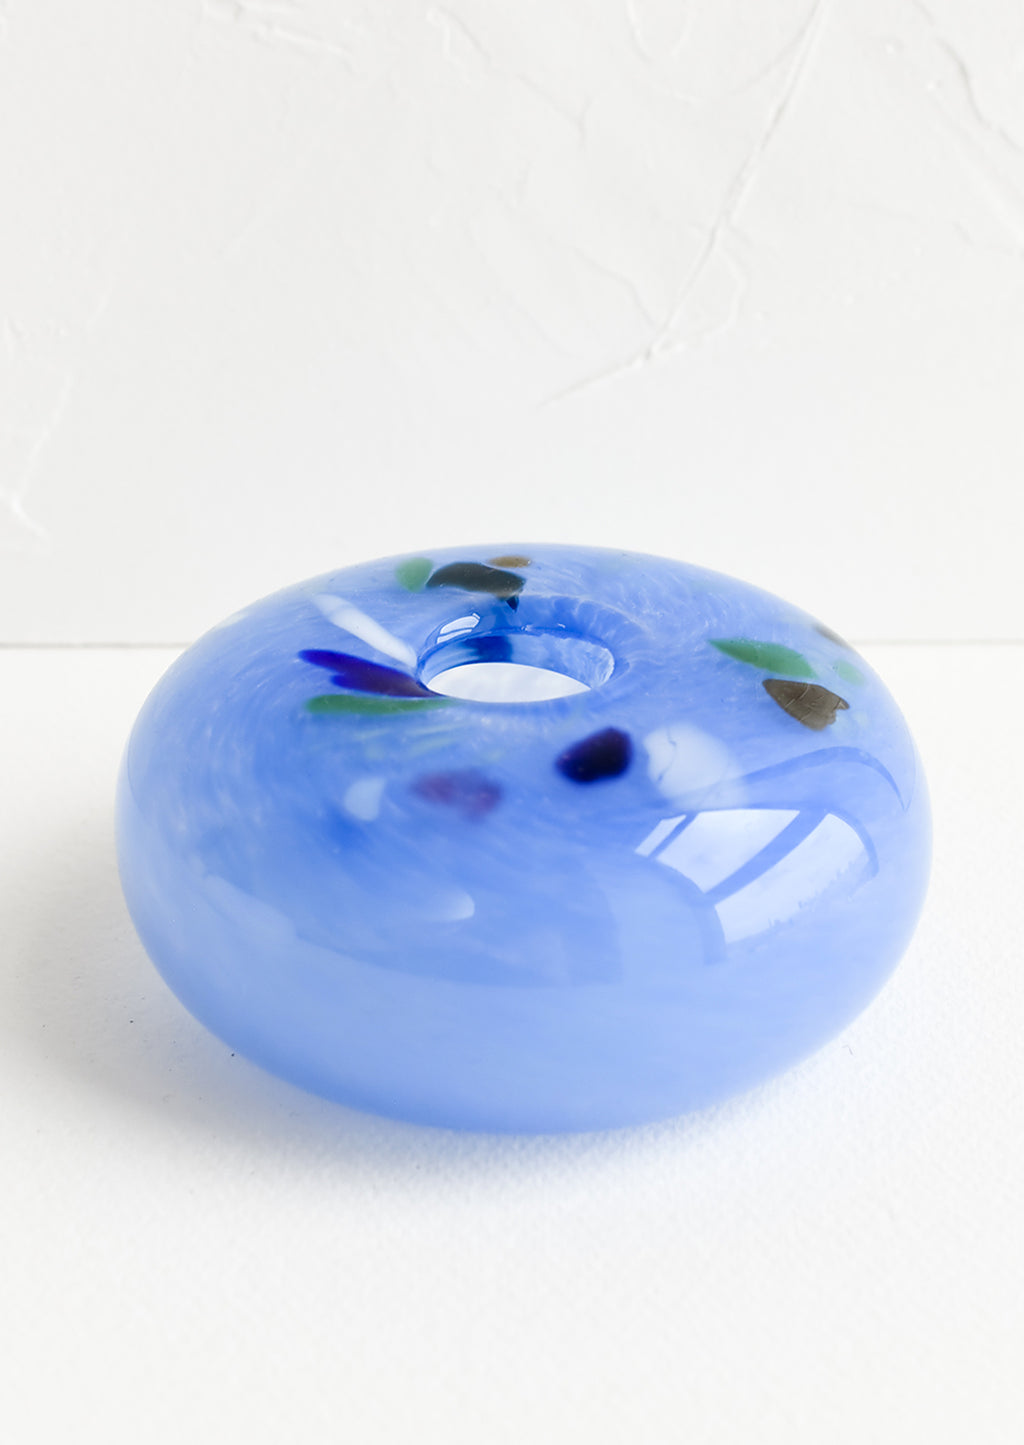 Periwinkle Multi: A glass bud vase in blue with colorful fleck detail around opening.